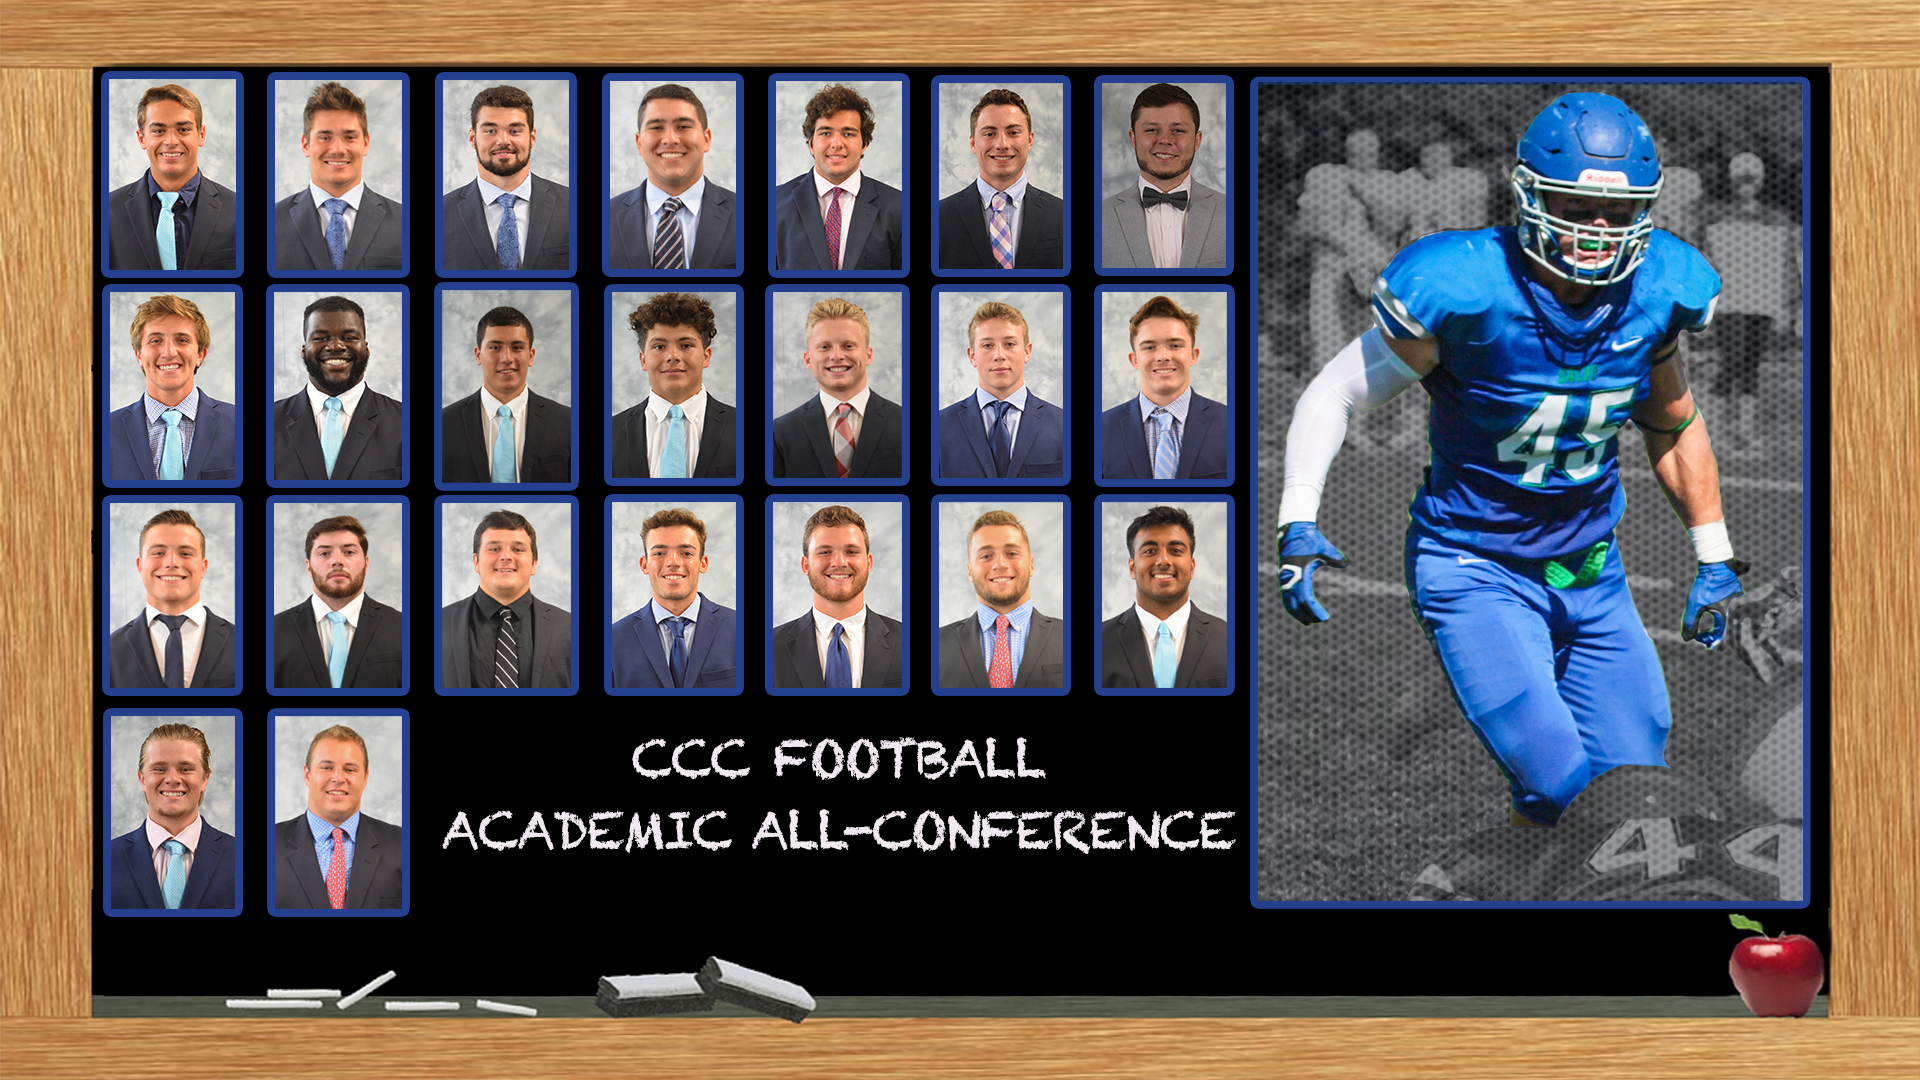 23 members of the Salve Regina football team were named to the Academic All-Conference team for the Commonwealth Coast Football Conference.